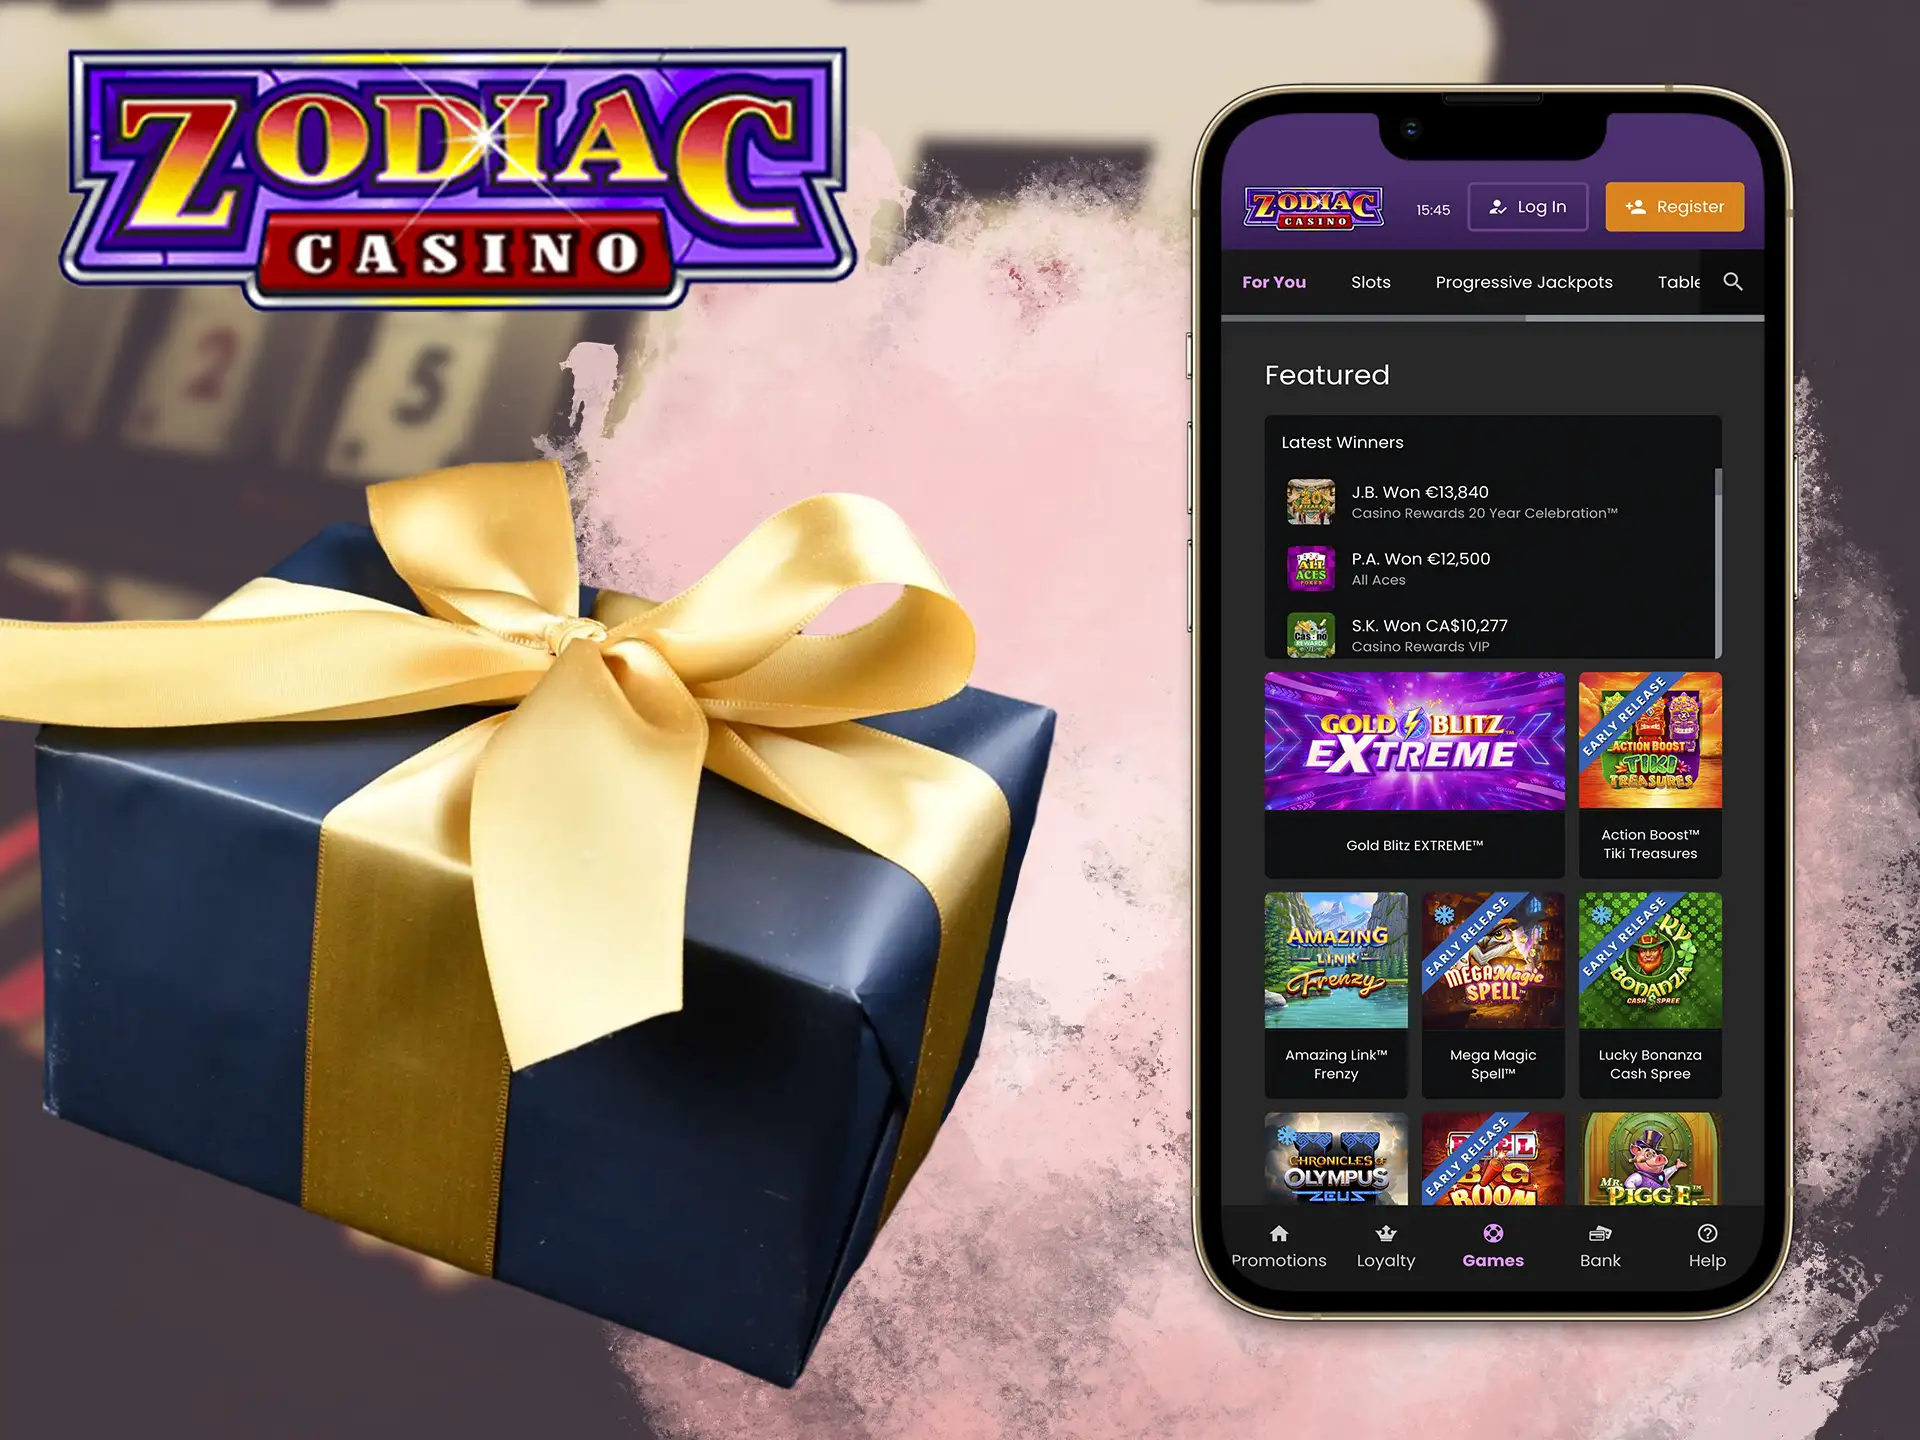 New users will receive a nice compliment from Zodiac Casino for creating an account, it can be used in both casino and sports betting.